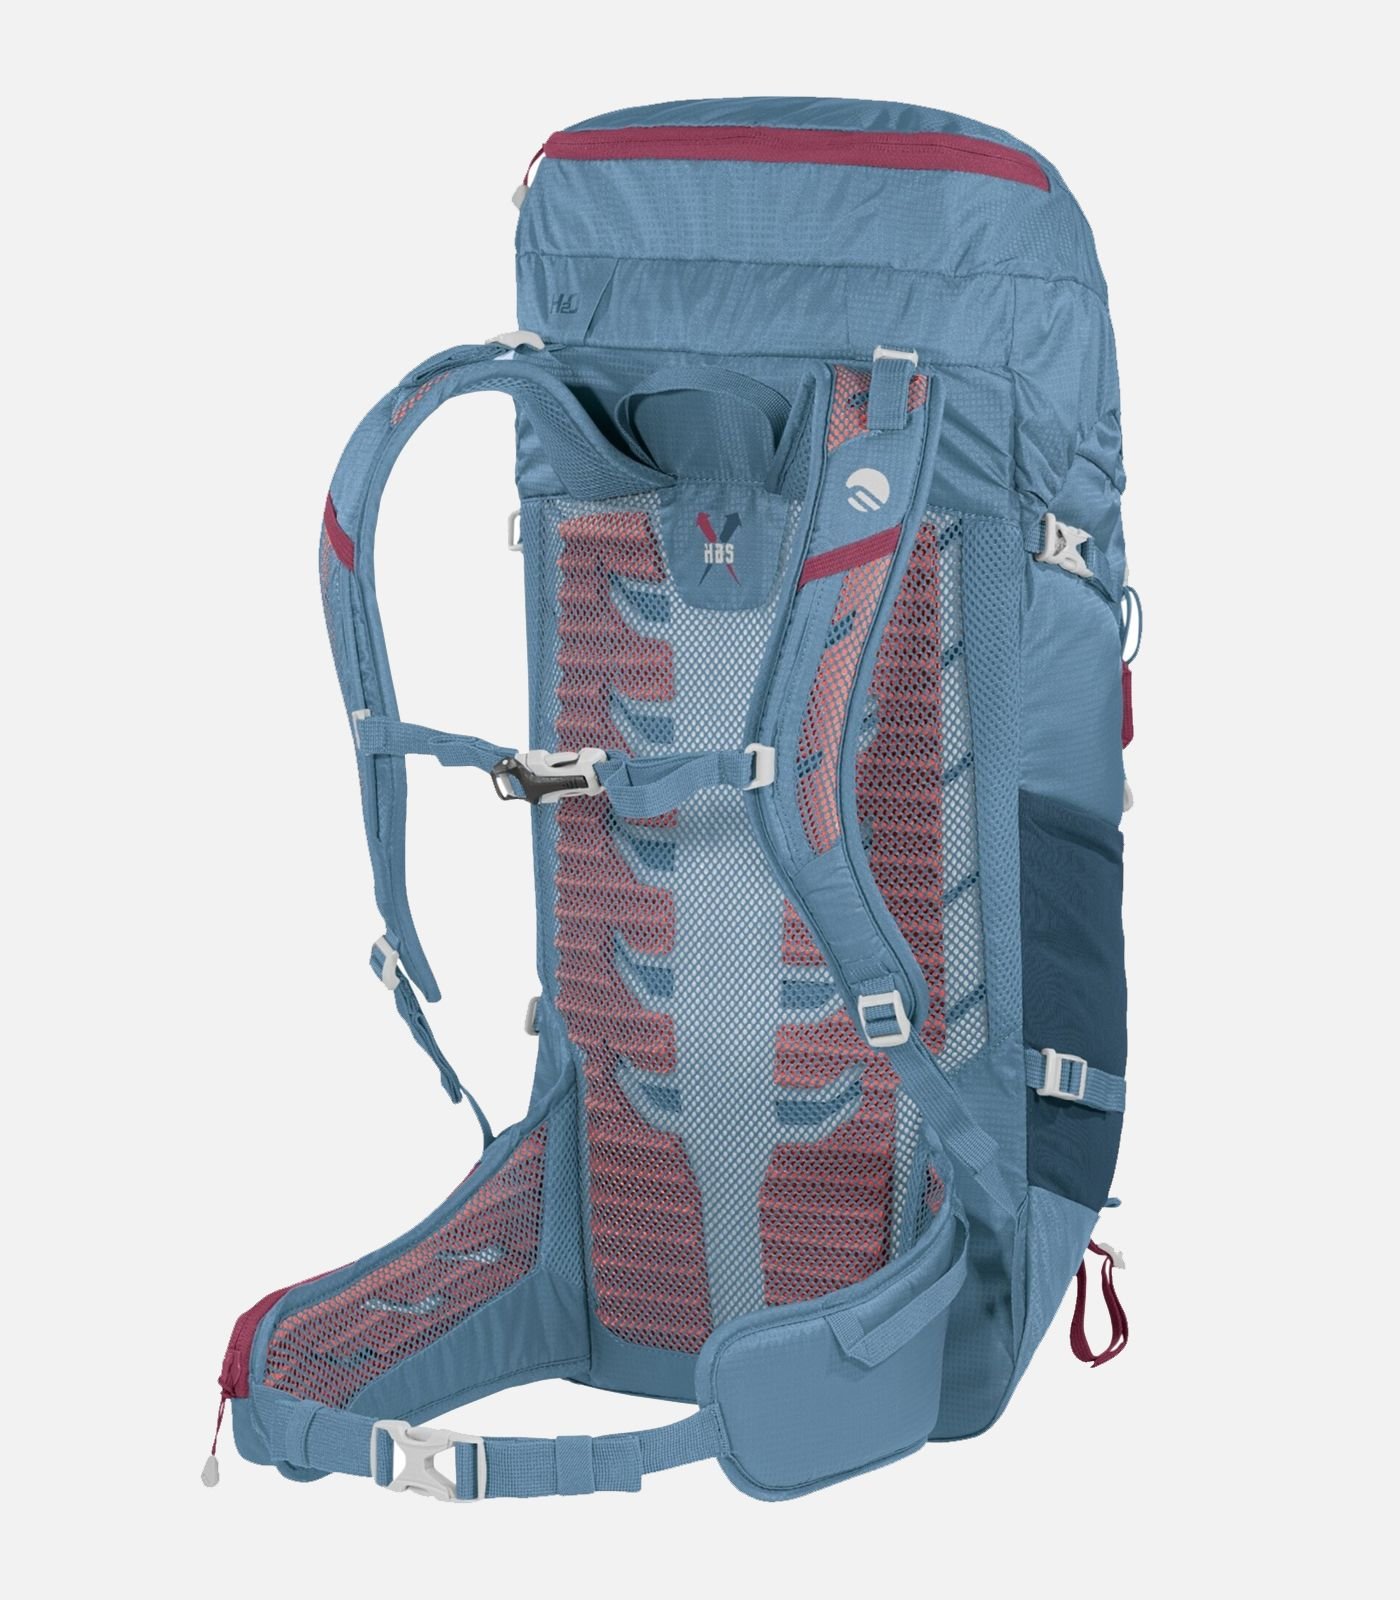 FERRINO quilted hiking backpack